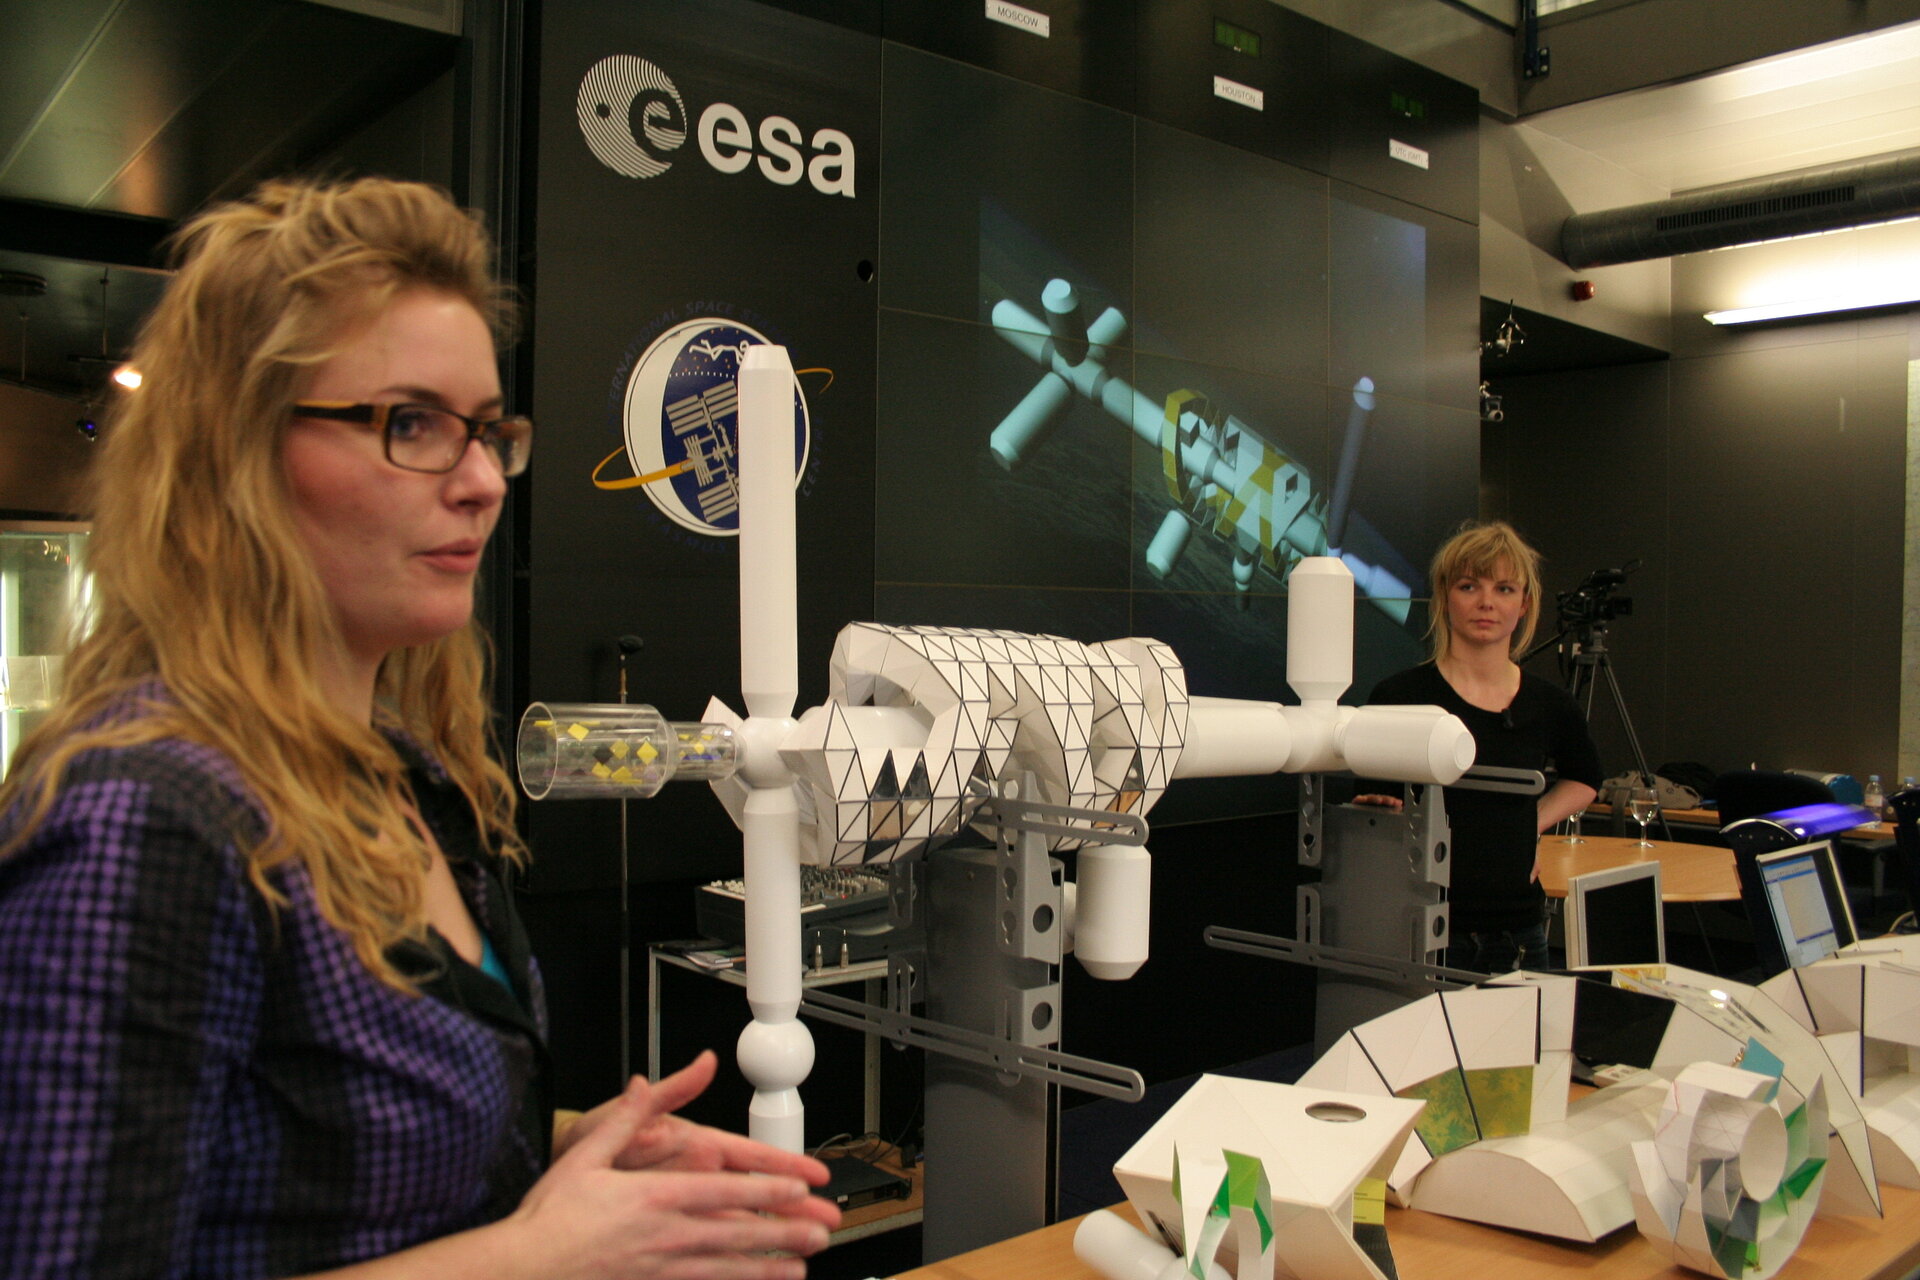 Danish architects design future space stations